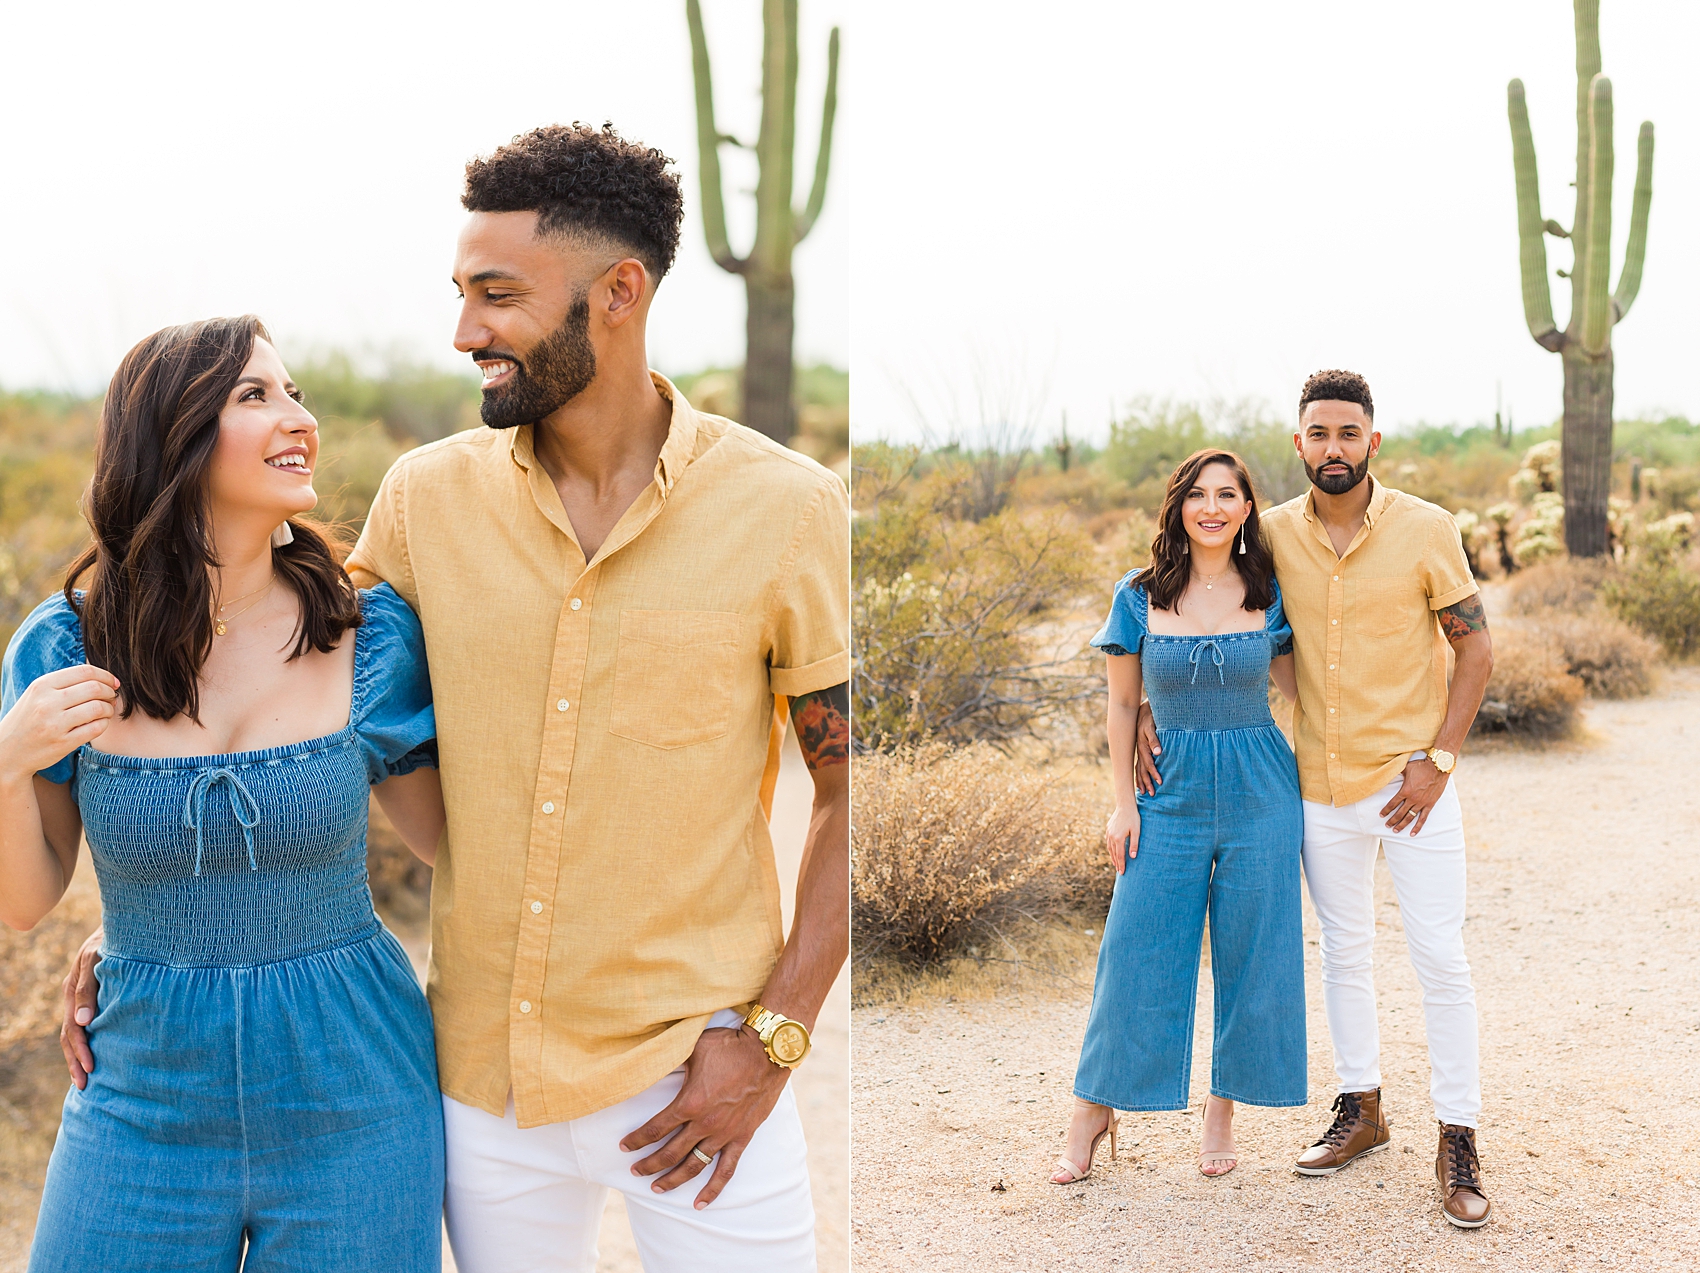 Leah Hope Photography | Scottsdale Phoenix Arizona | Desert Landscape Cactus Scenery | Couple Photos | In Love | Romantic Couple Pictures | Baby Announcement | Baby Surprise | What to Wear | How to Pose | Couple Poses | Portrait Photographer | Engagement Photography 